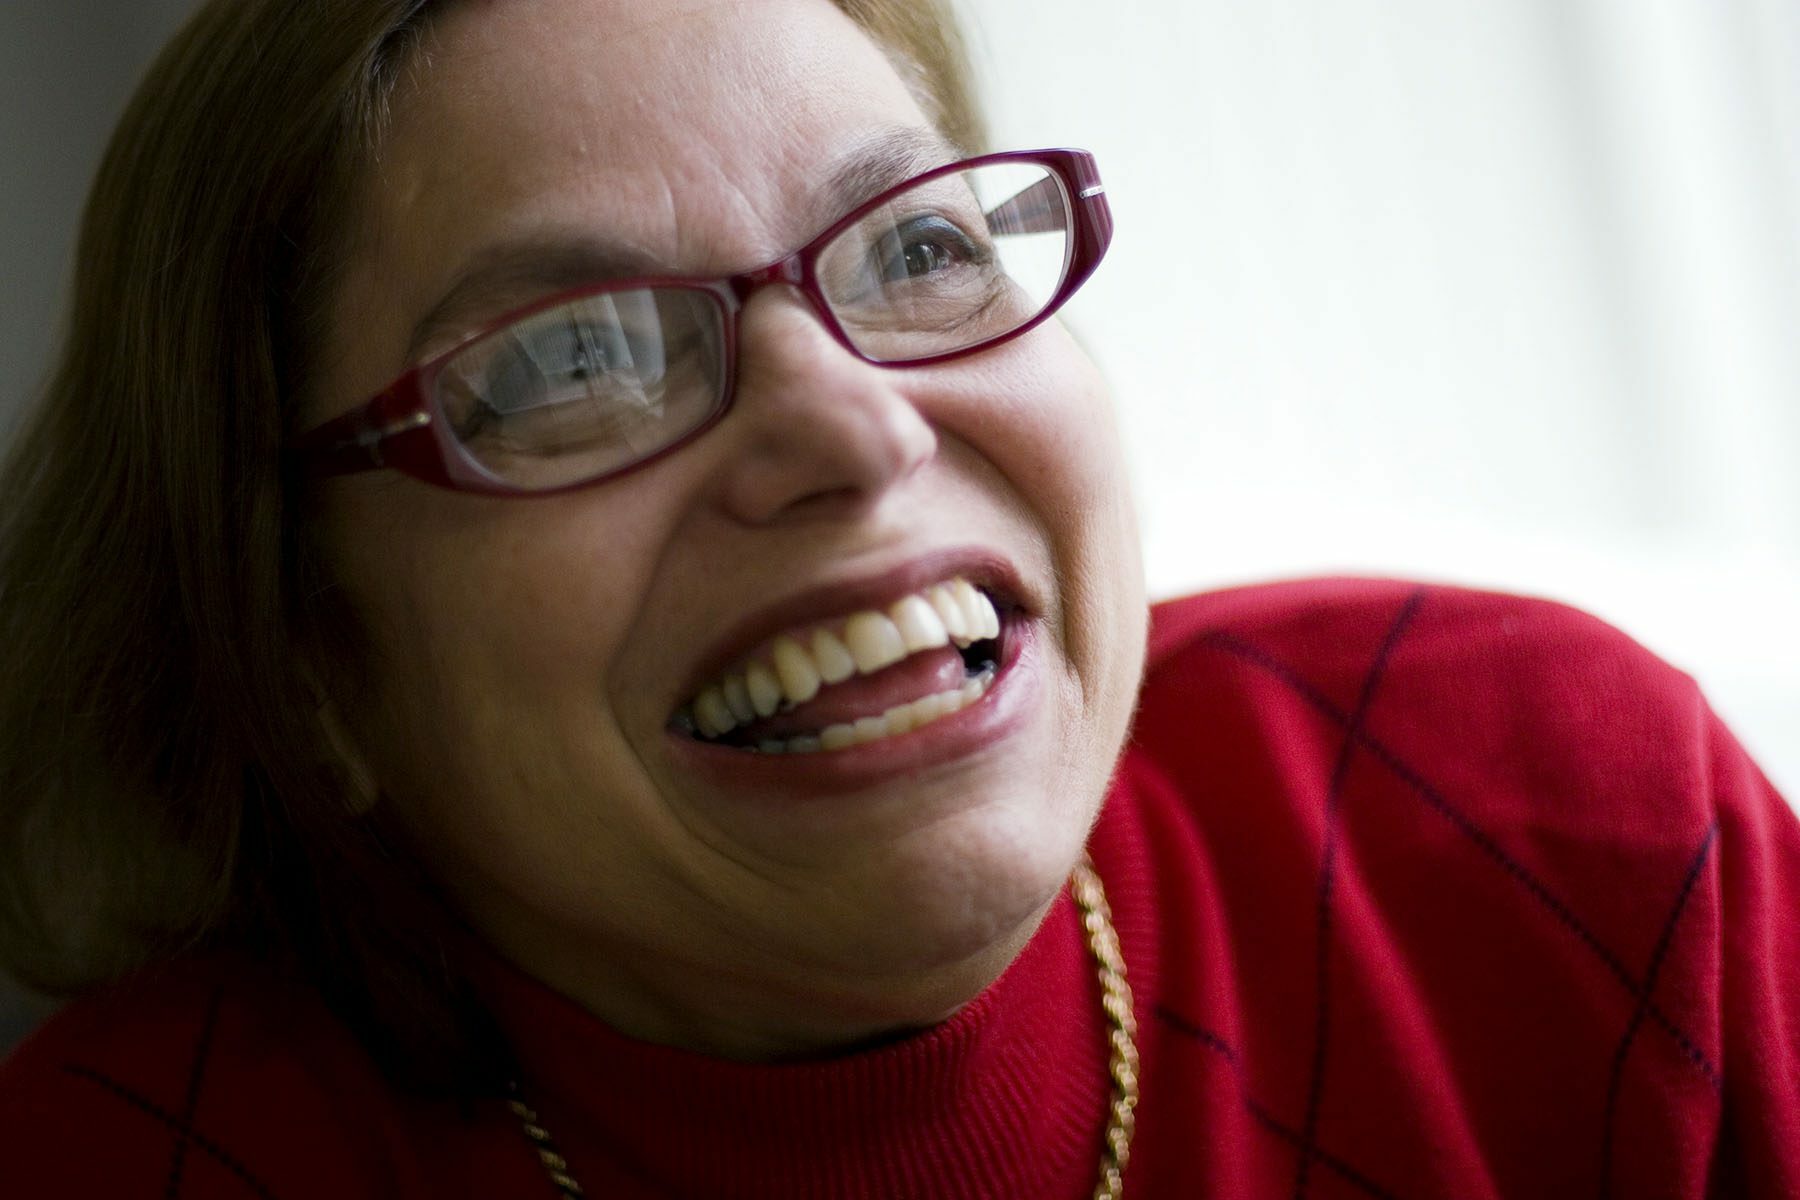 Judy Heumann smiles as she poses for a portrait.